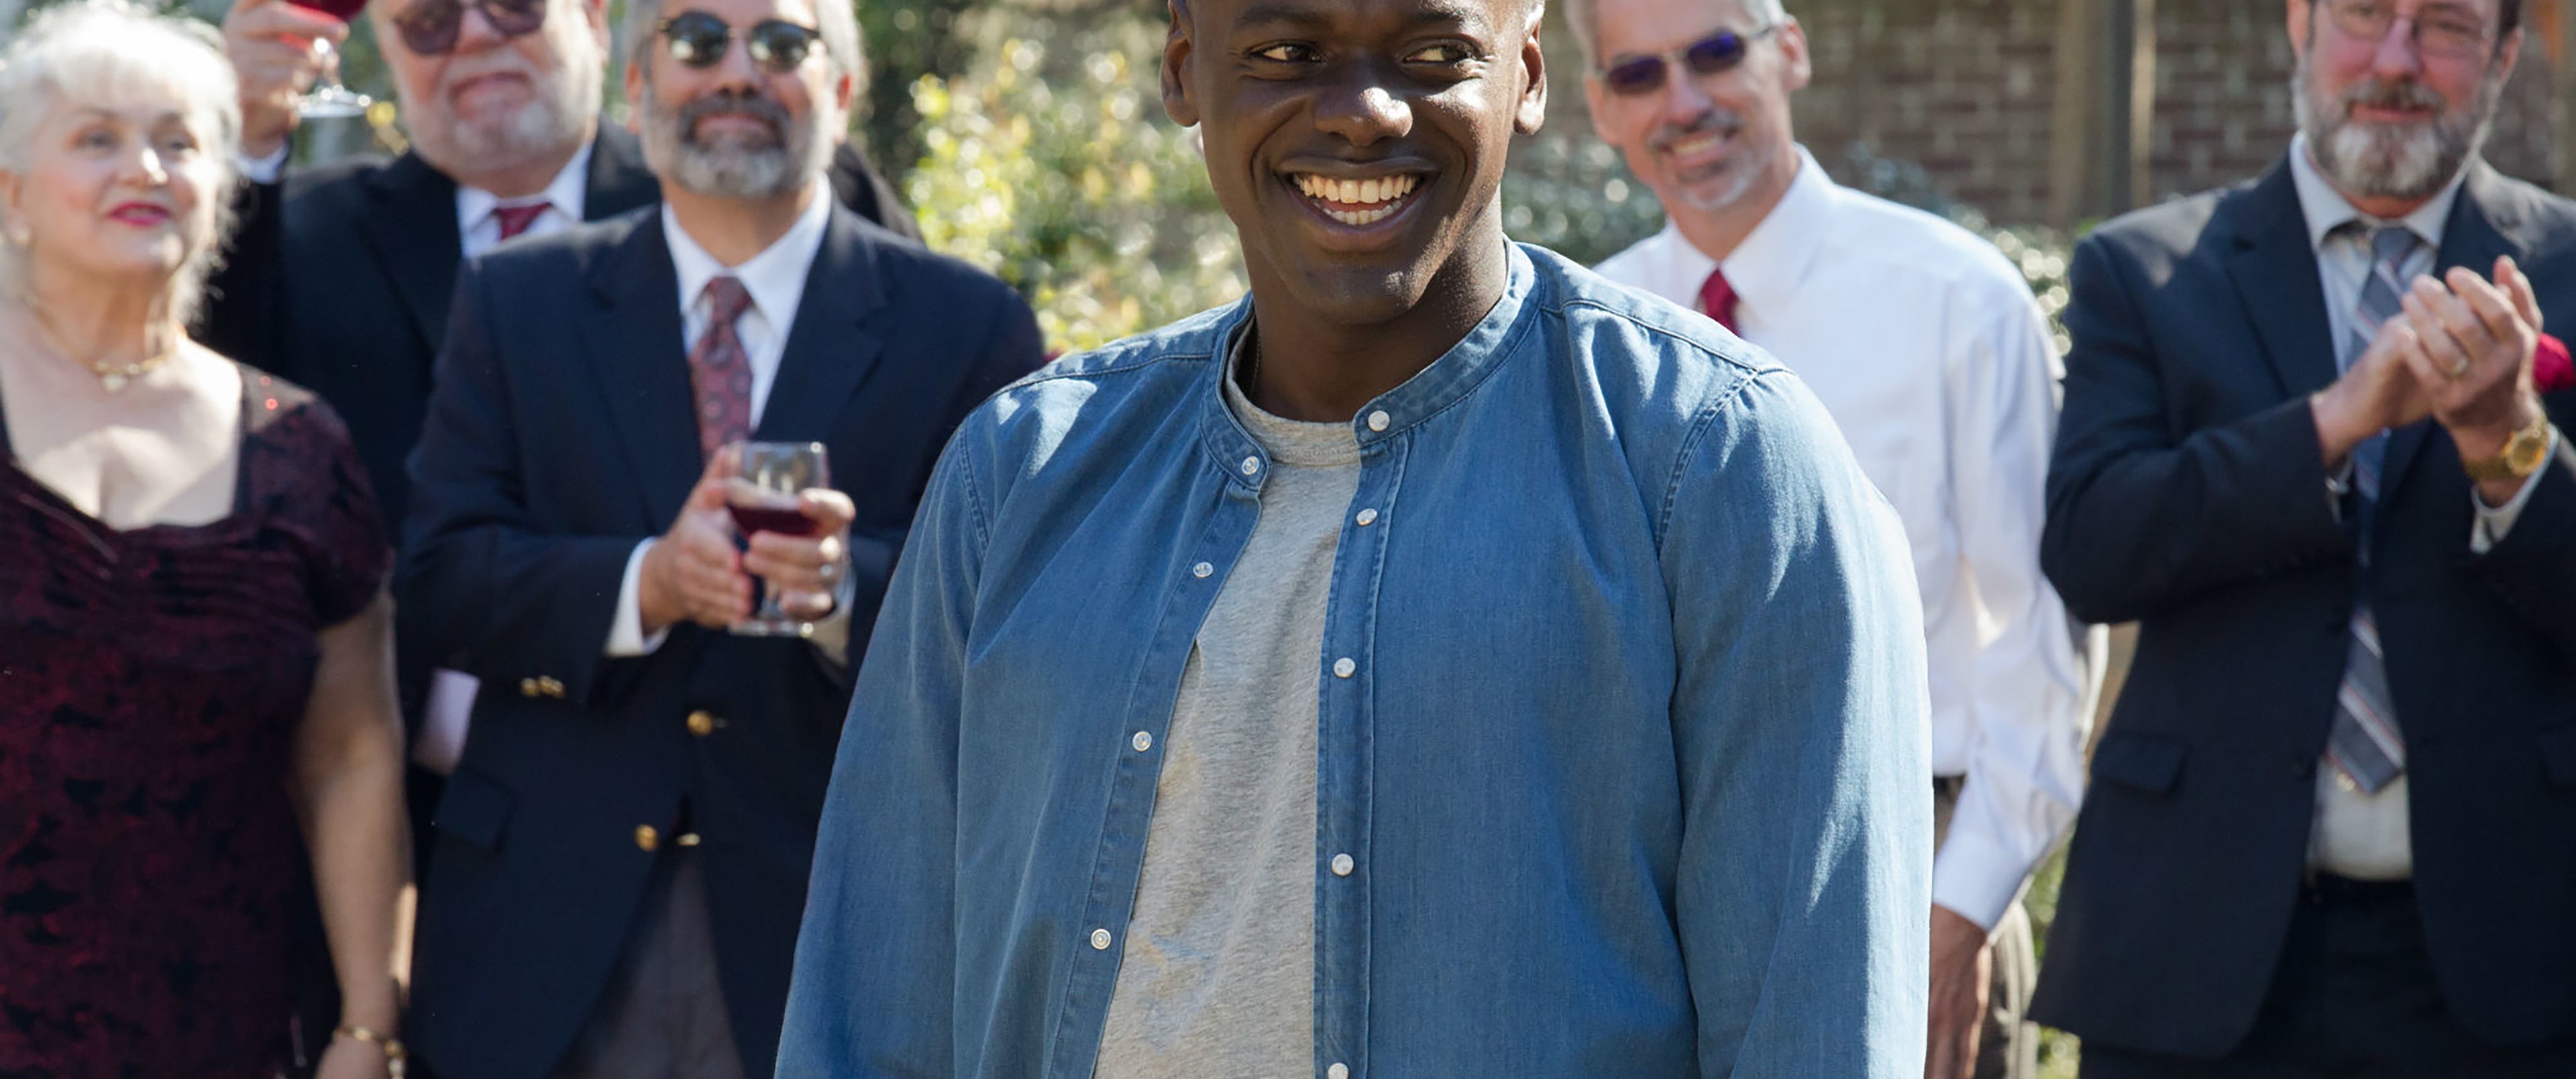 Still image from Get Out. Daniel Kaluuya smiling amongst but separate from partygoers.